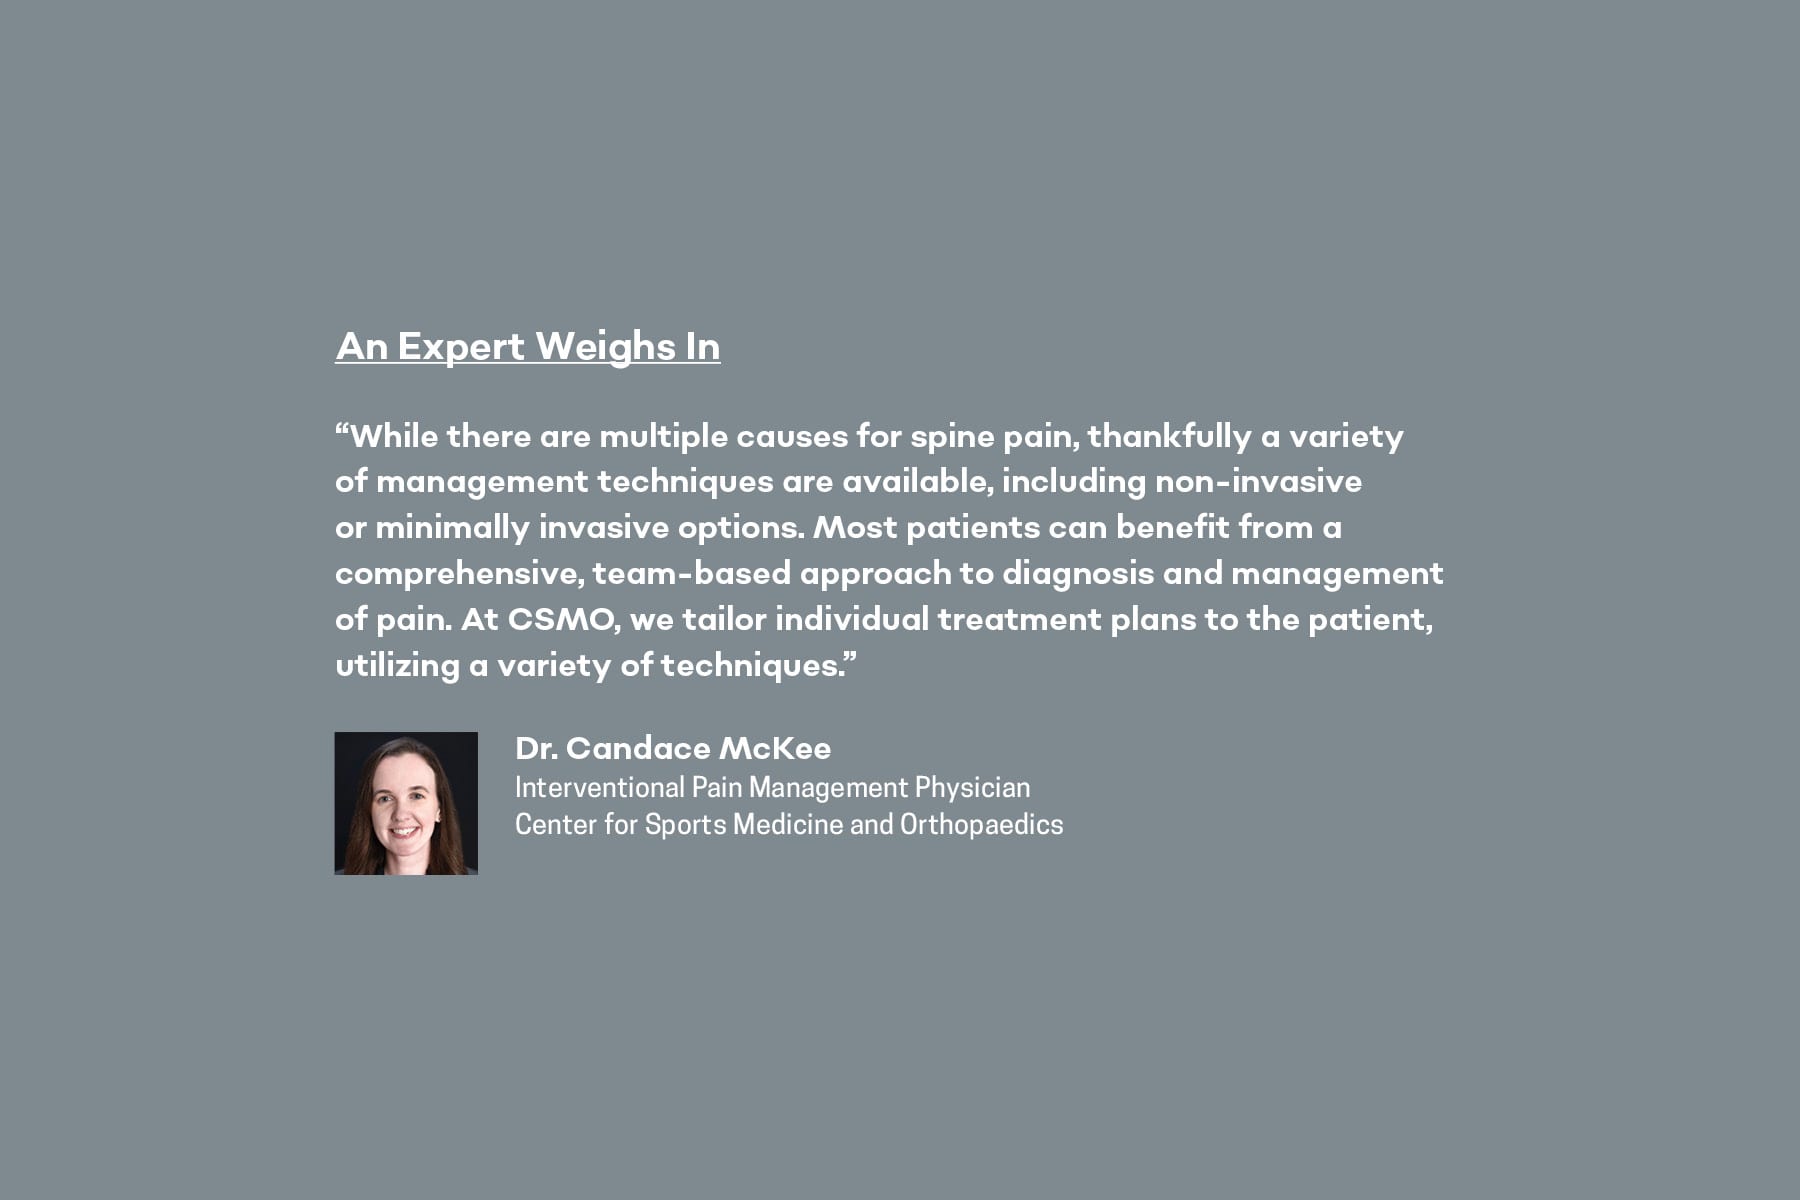 Dr. Candace McKee quote on alternatives to spinal fusion